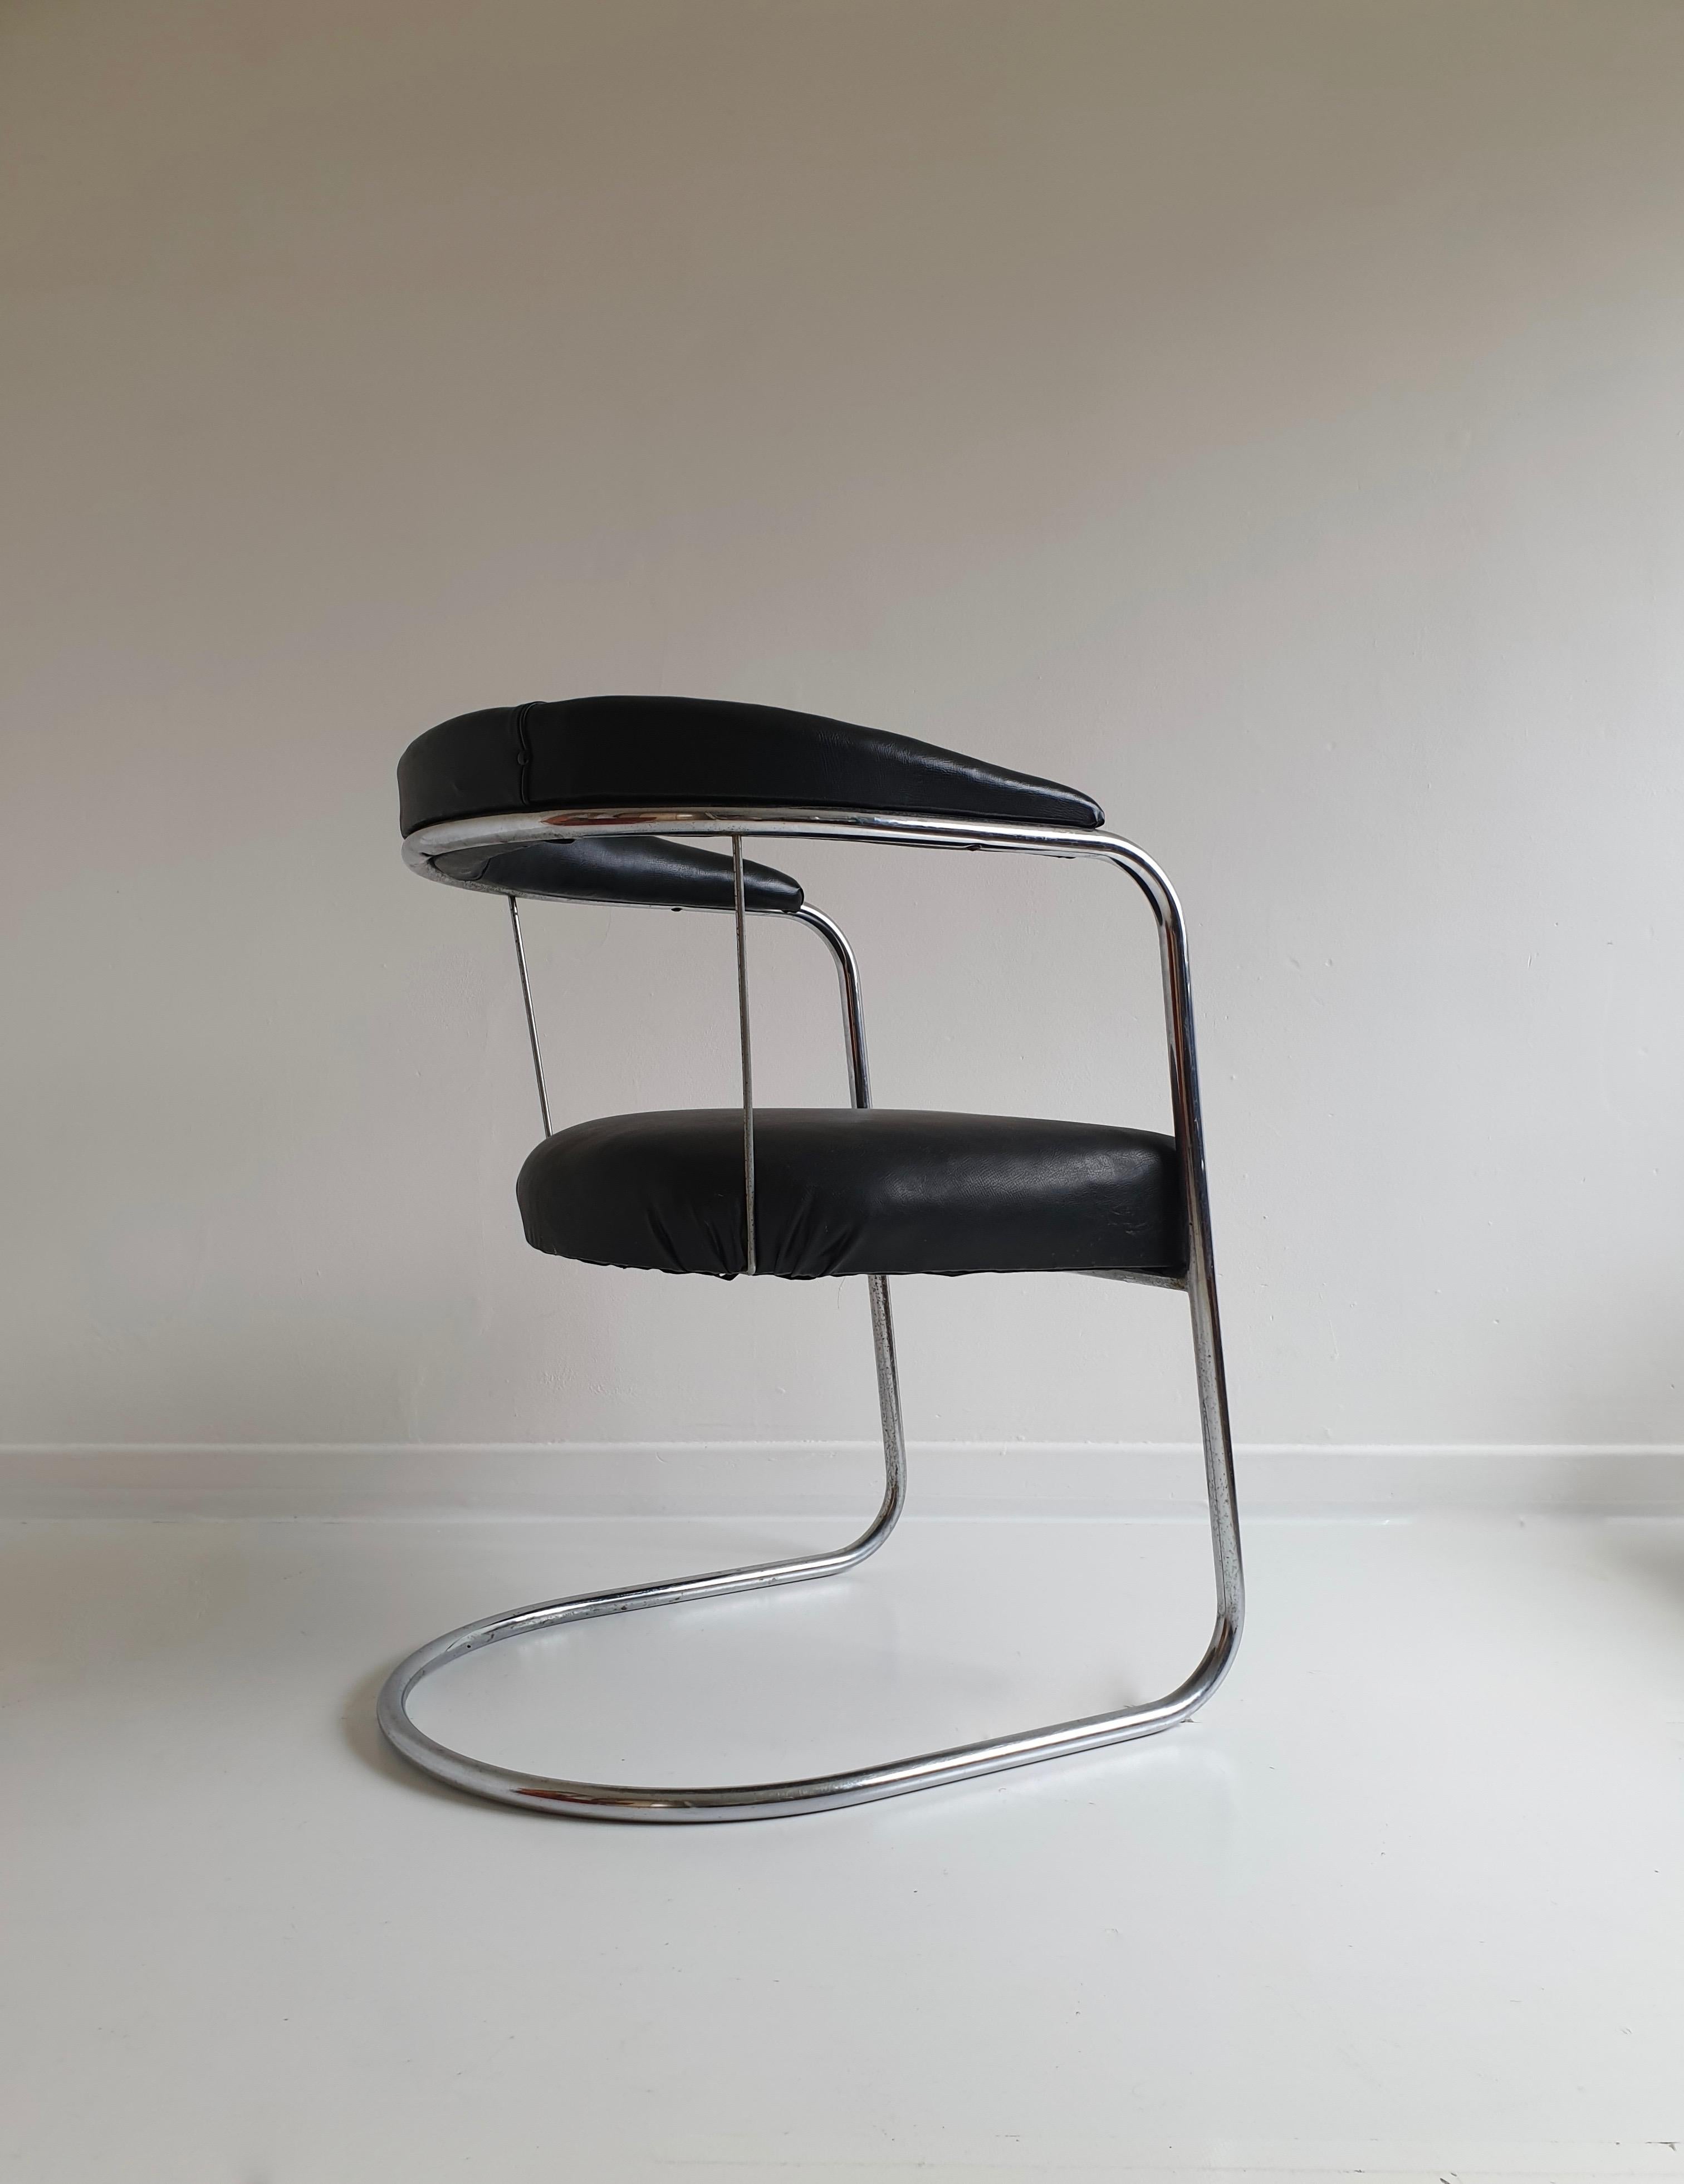 Chrome and leatherette tubular cantilever chair from PEL, England, circa 1930.

The chair is an example of British modernism influenced by Bauhaus and Art Deco and their pioneering design work in steel tube furniture. PEL worked with the top